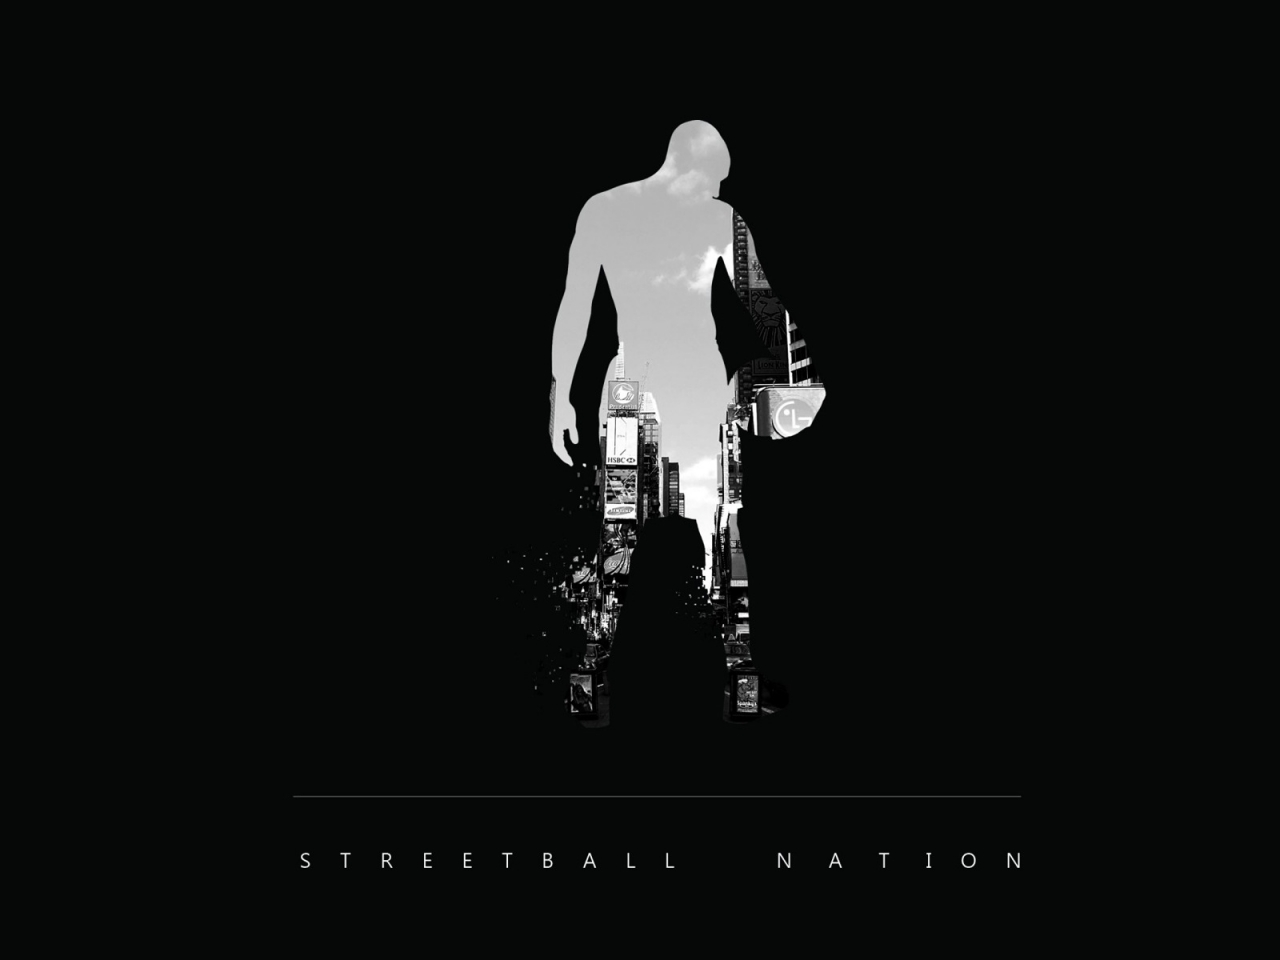 Streetball Nation for 1280 x 960 resolution